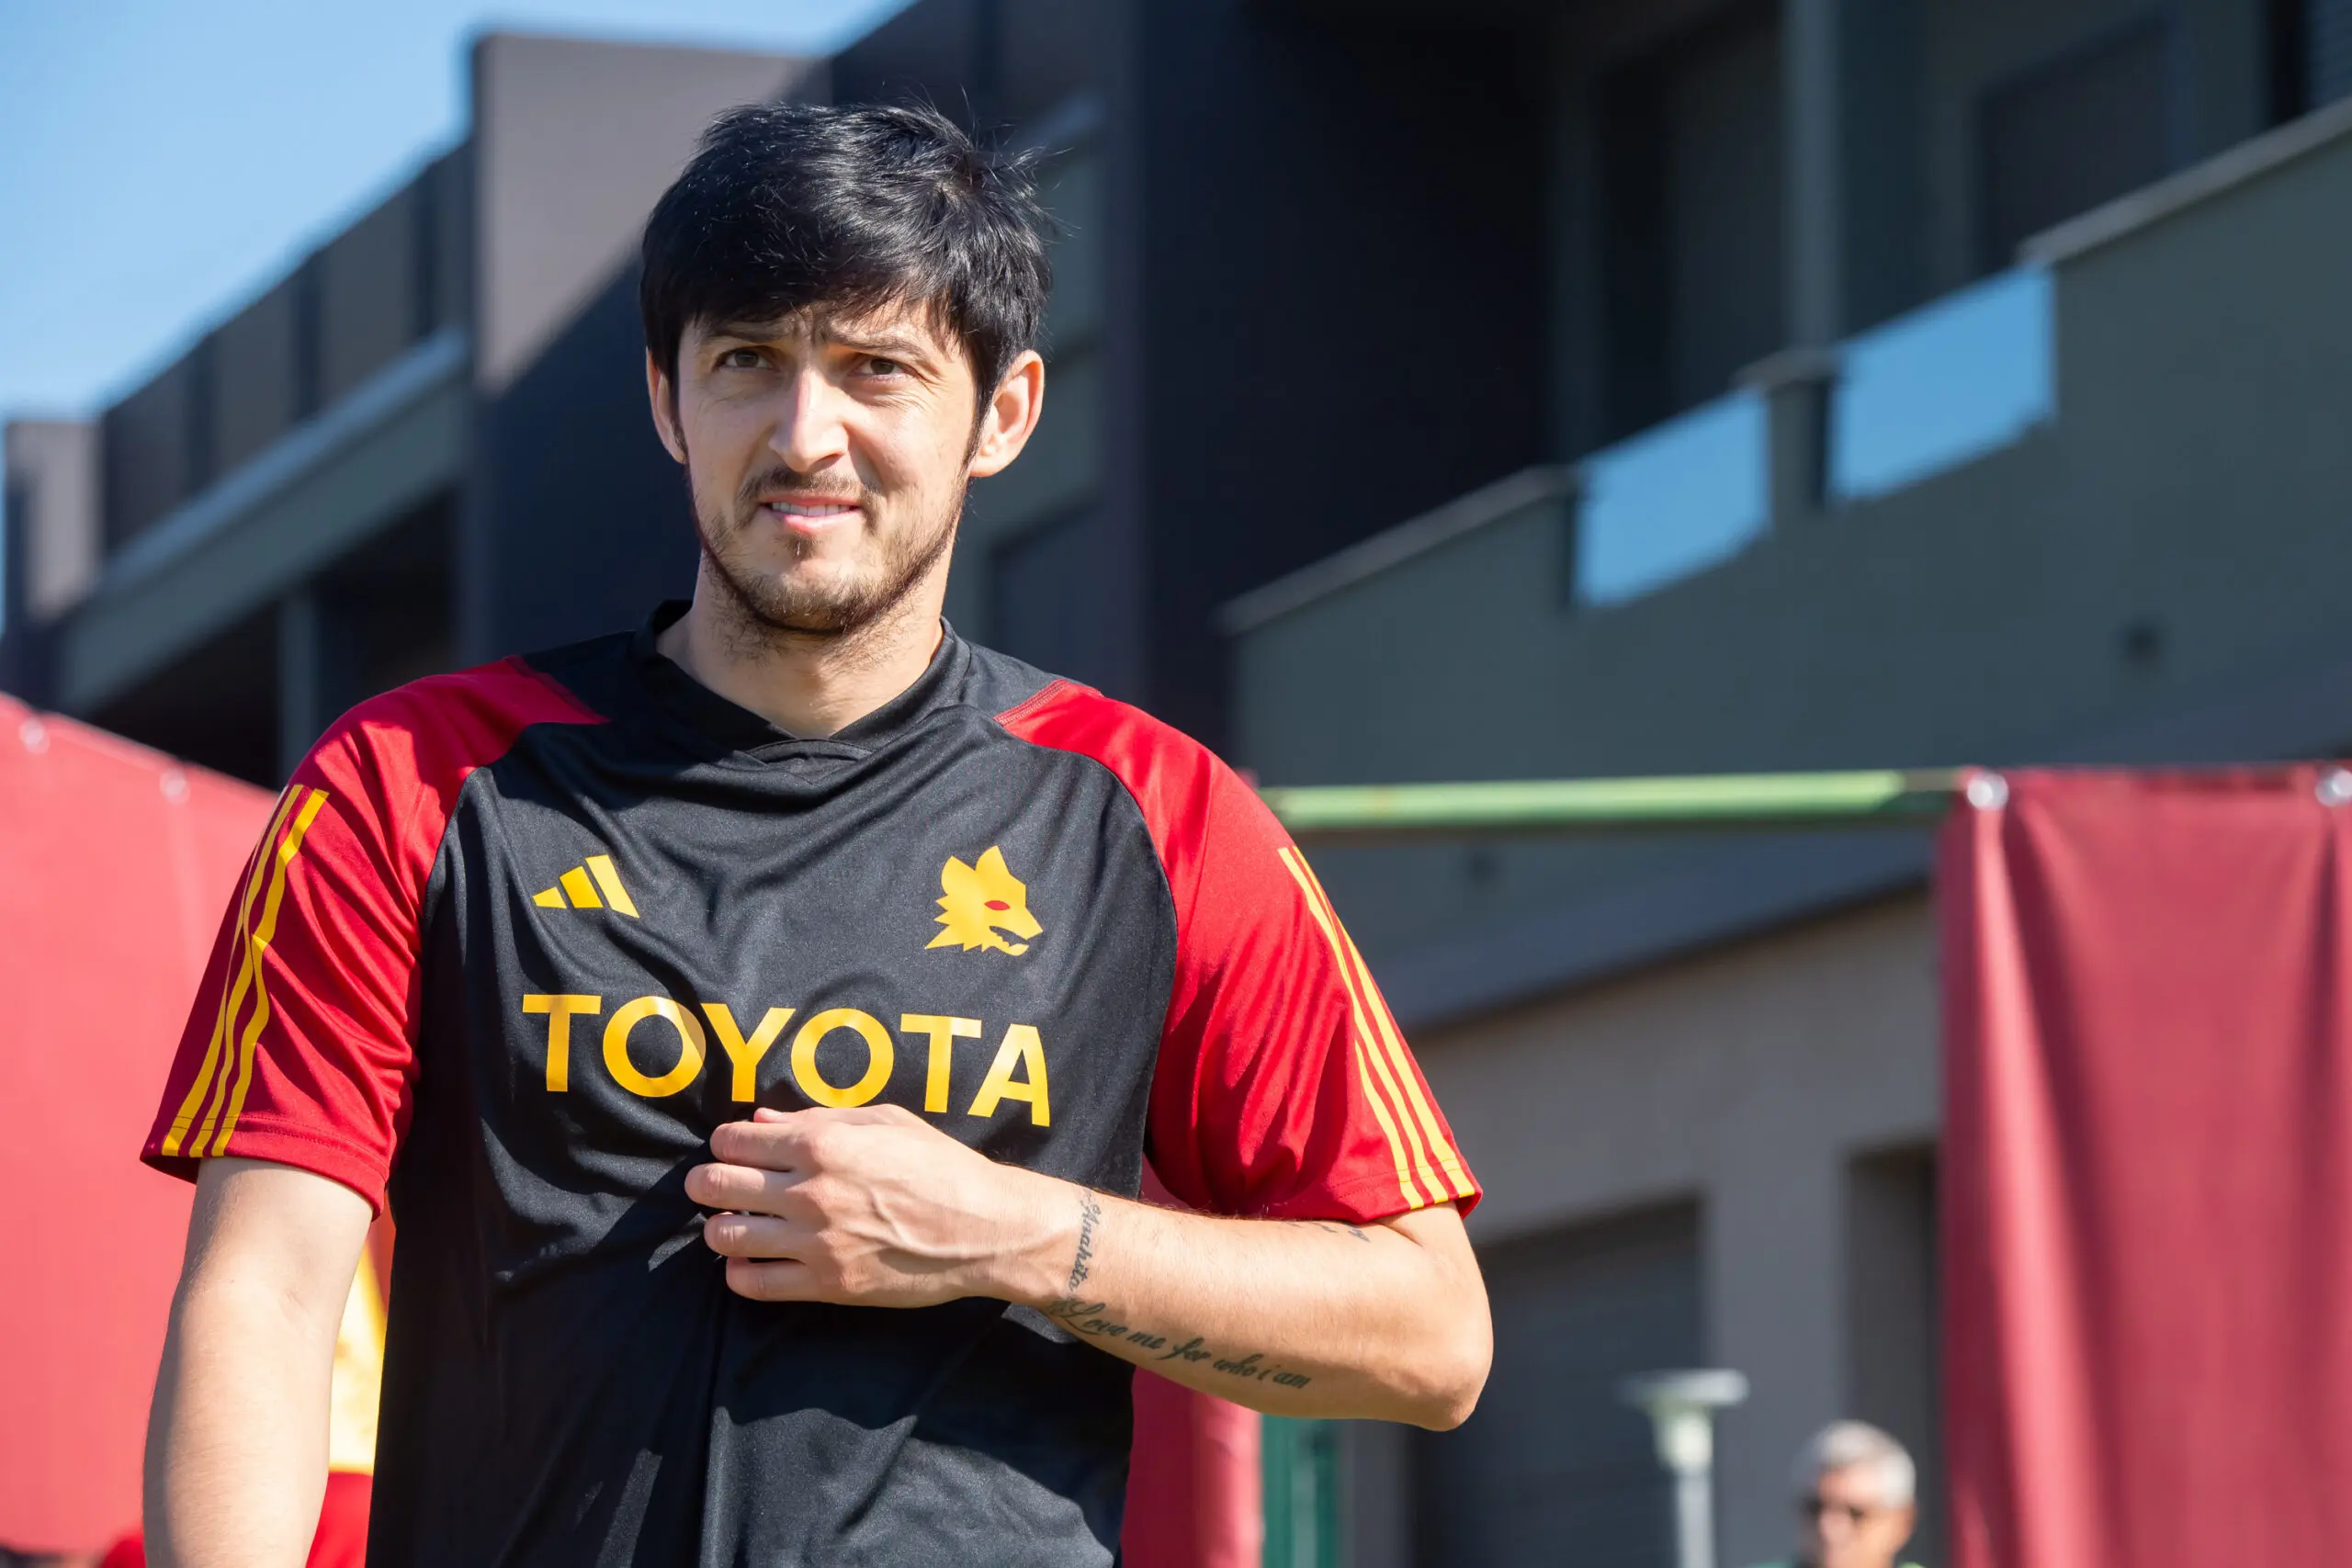 Sardar Azmoun recently made his Roma debut after joining on loan from Bayer Leverkusen last summer. His agent Andrea Pellegatti commented.